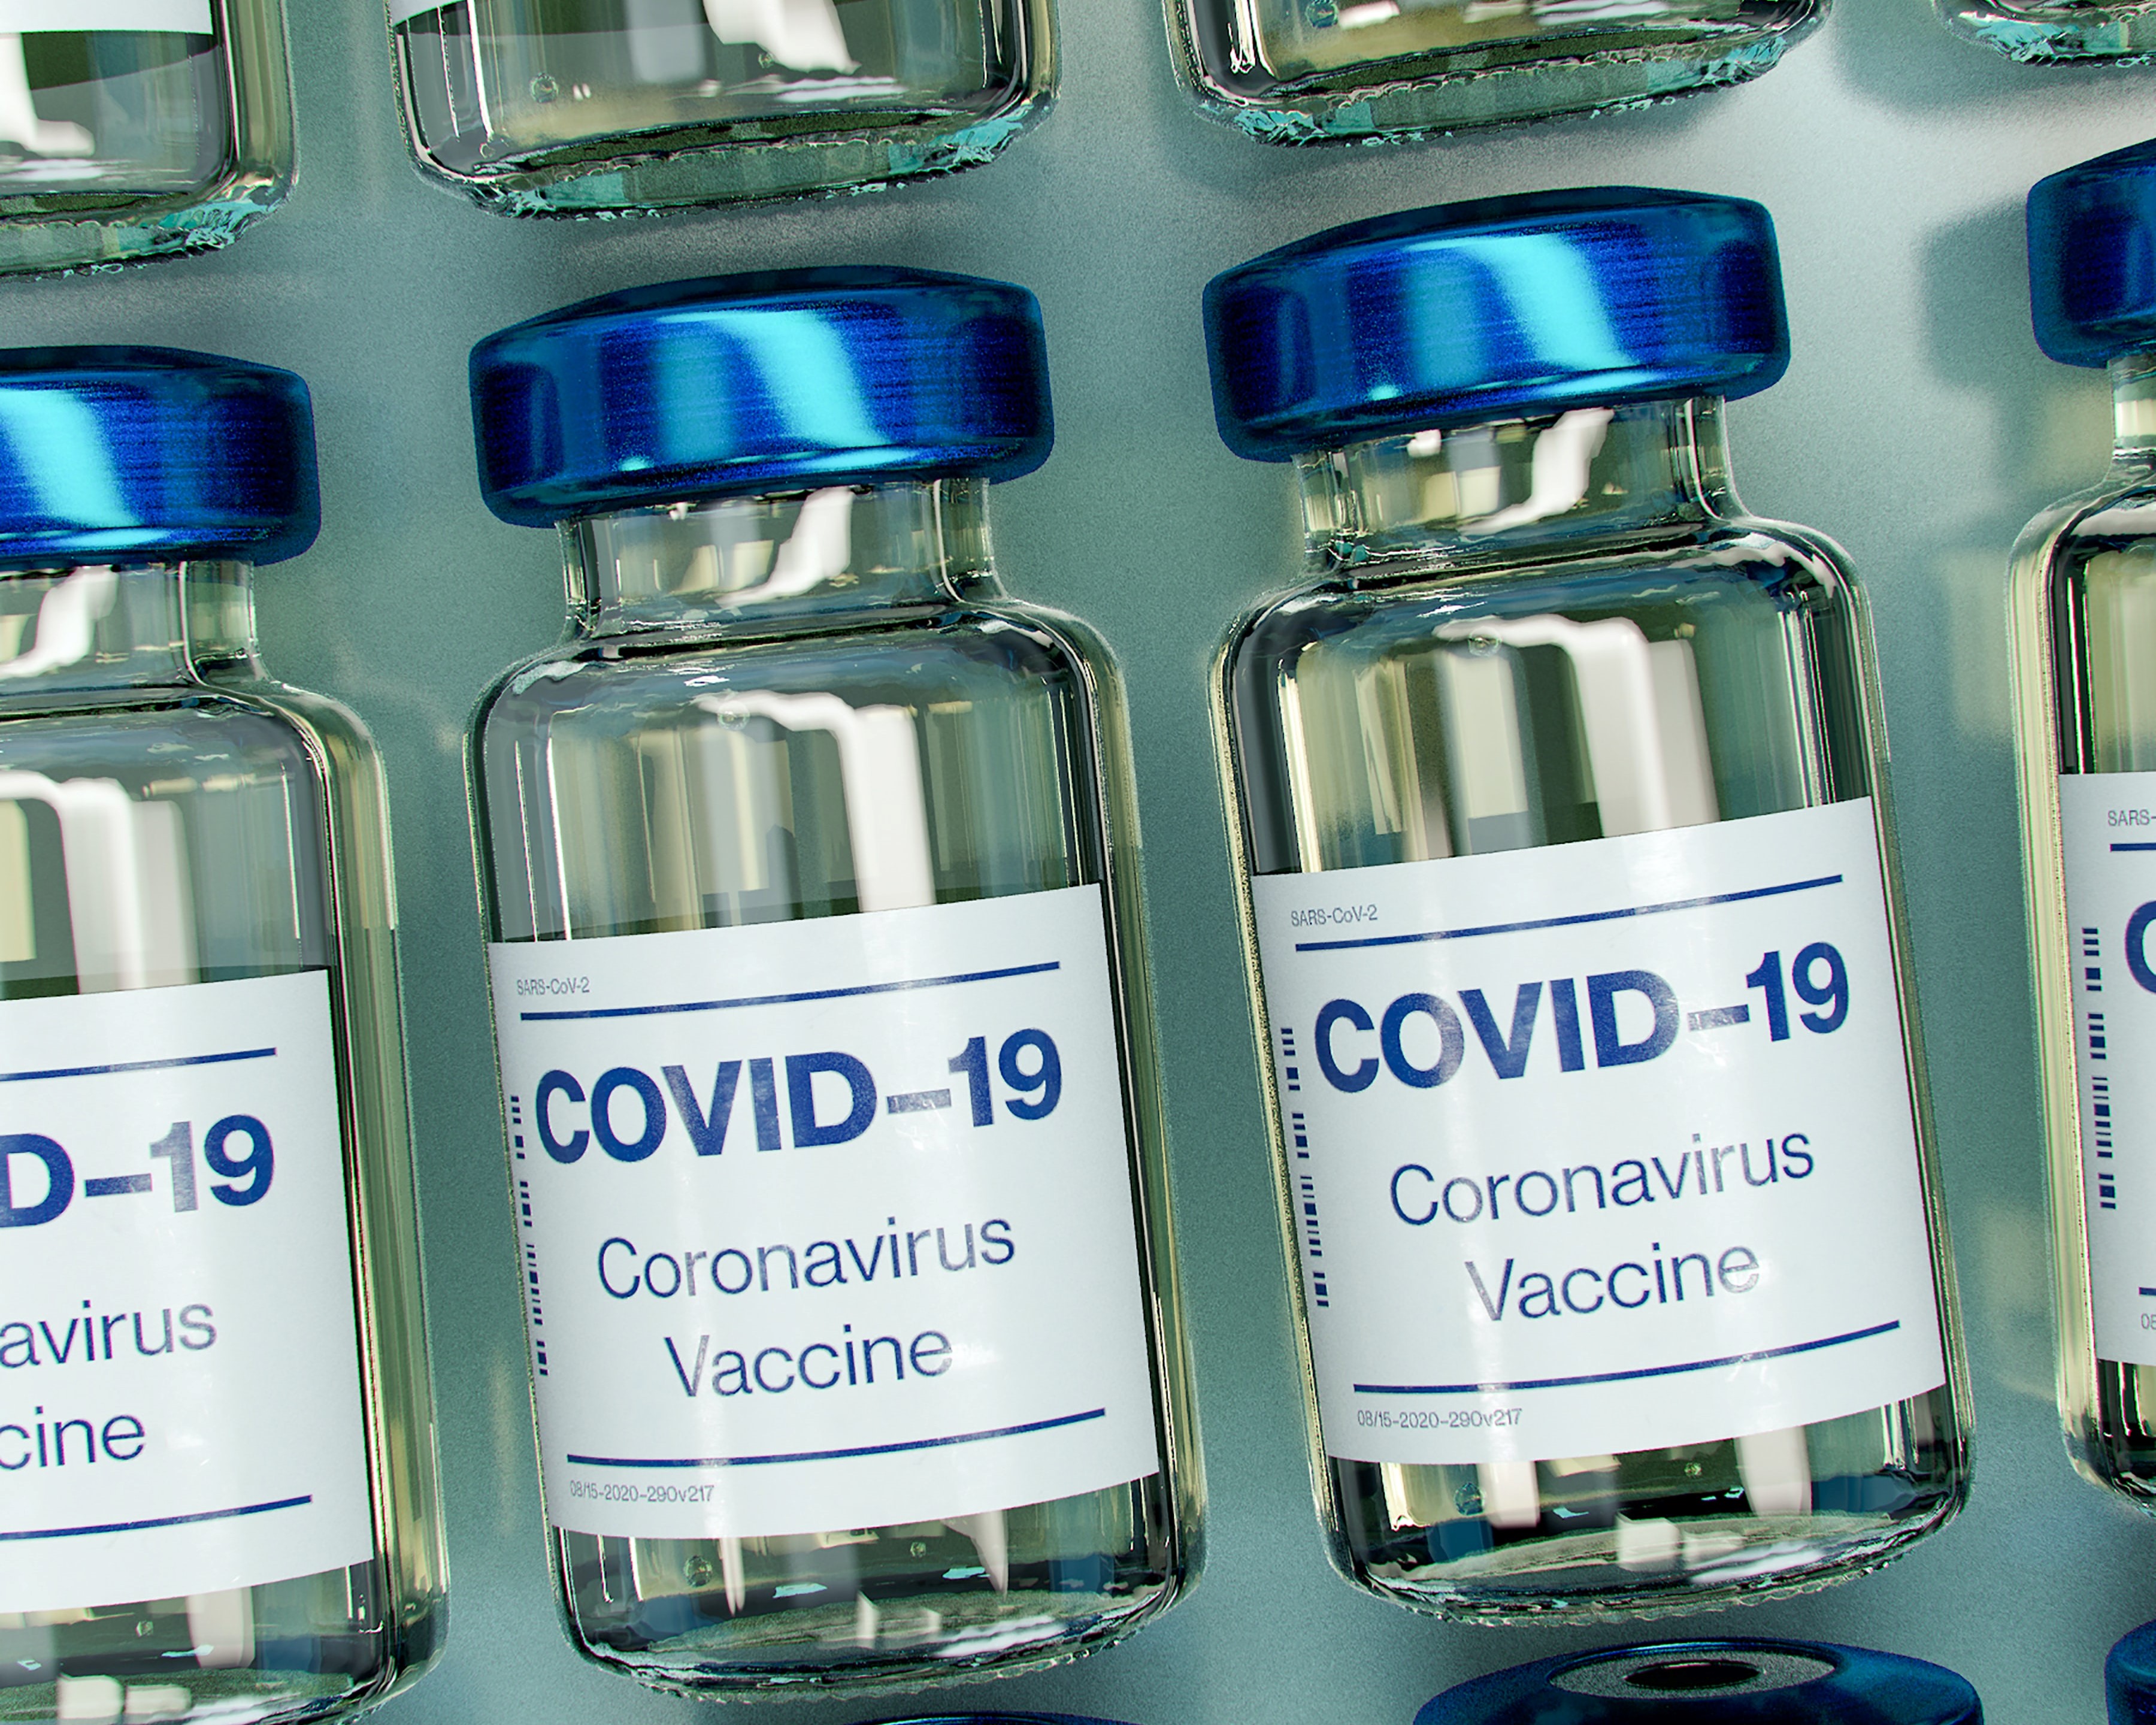 Photograph of a row of glass bottles containing vaccines against COVID-19.